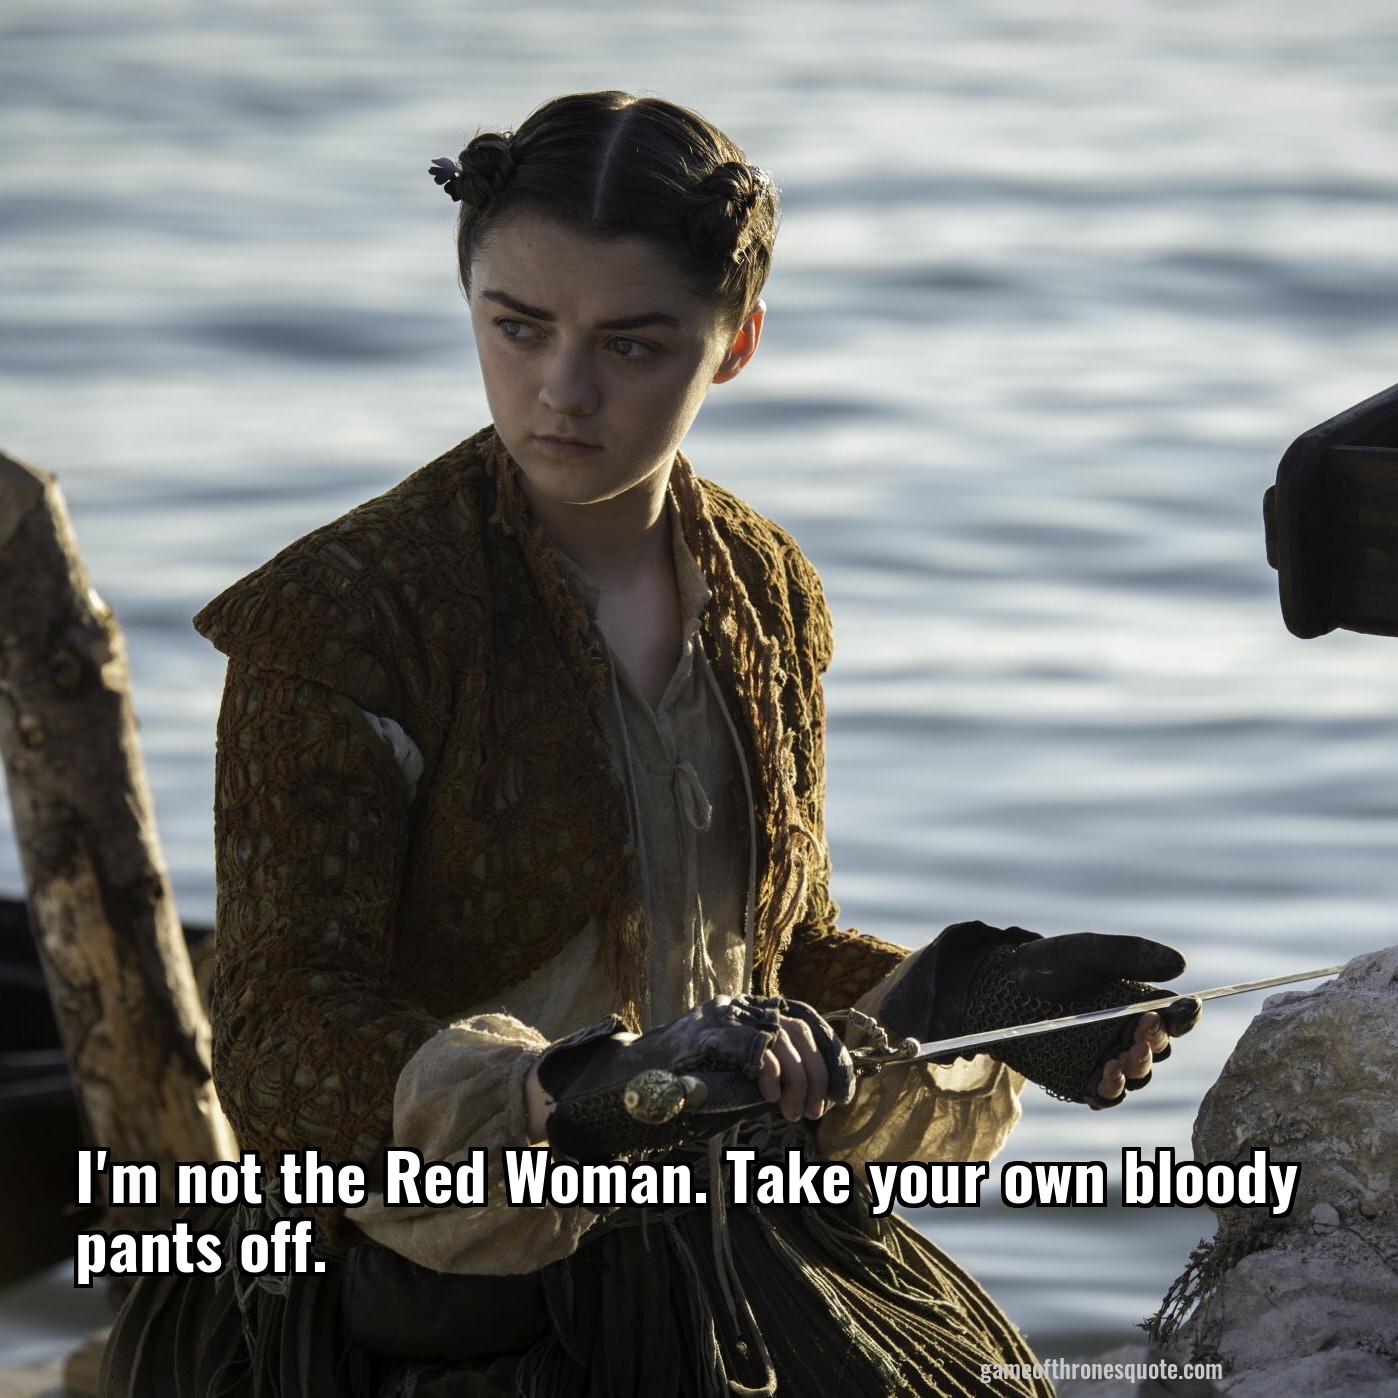 I'm not the Red Woman. Take your own bloody pants off.